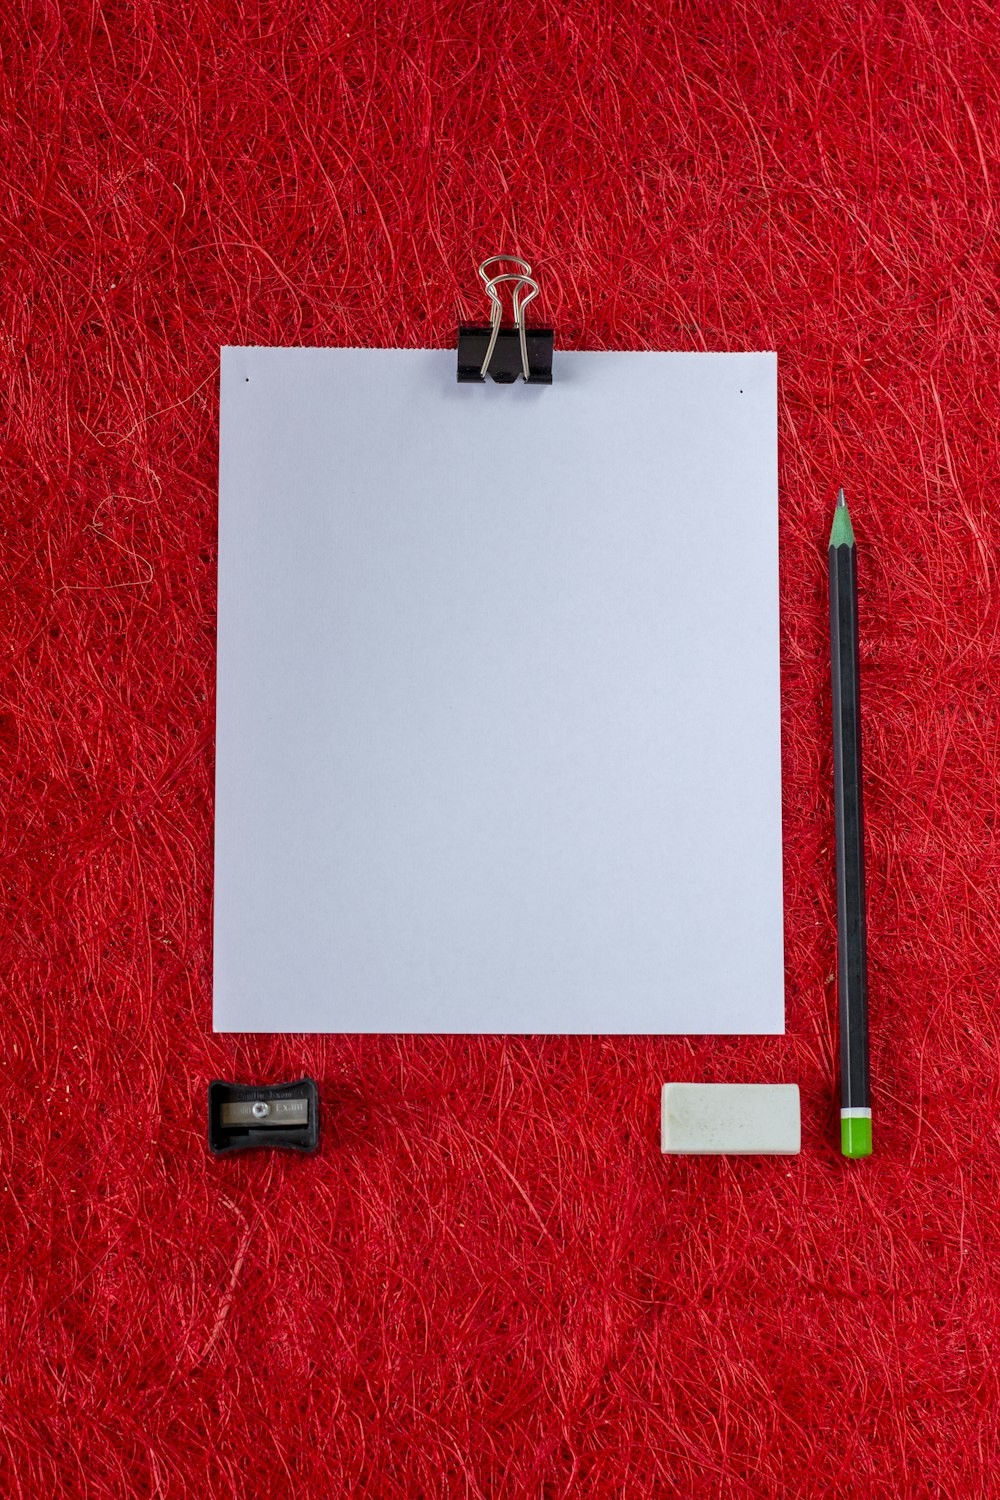 a piece of paper, pencil and eraser on a red carpet